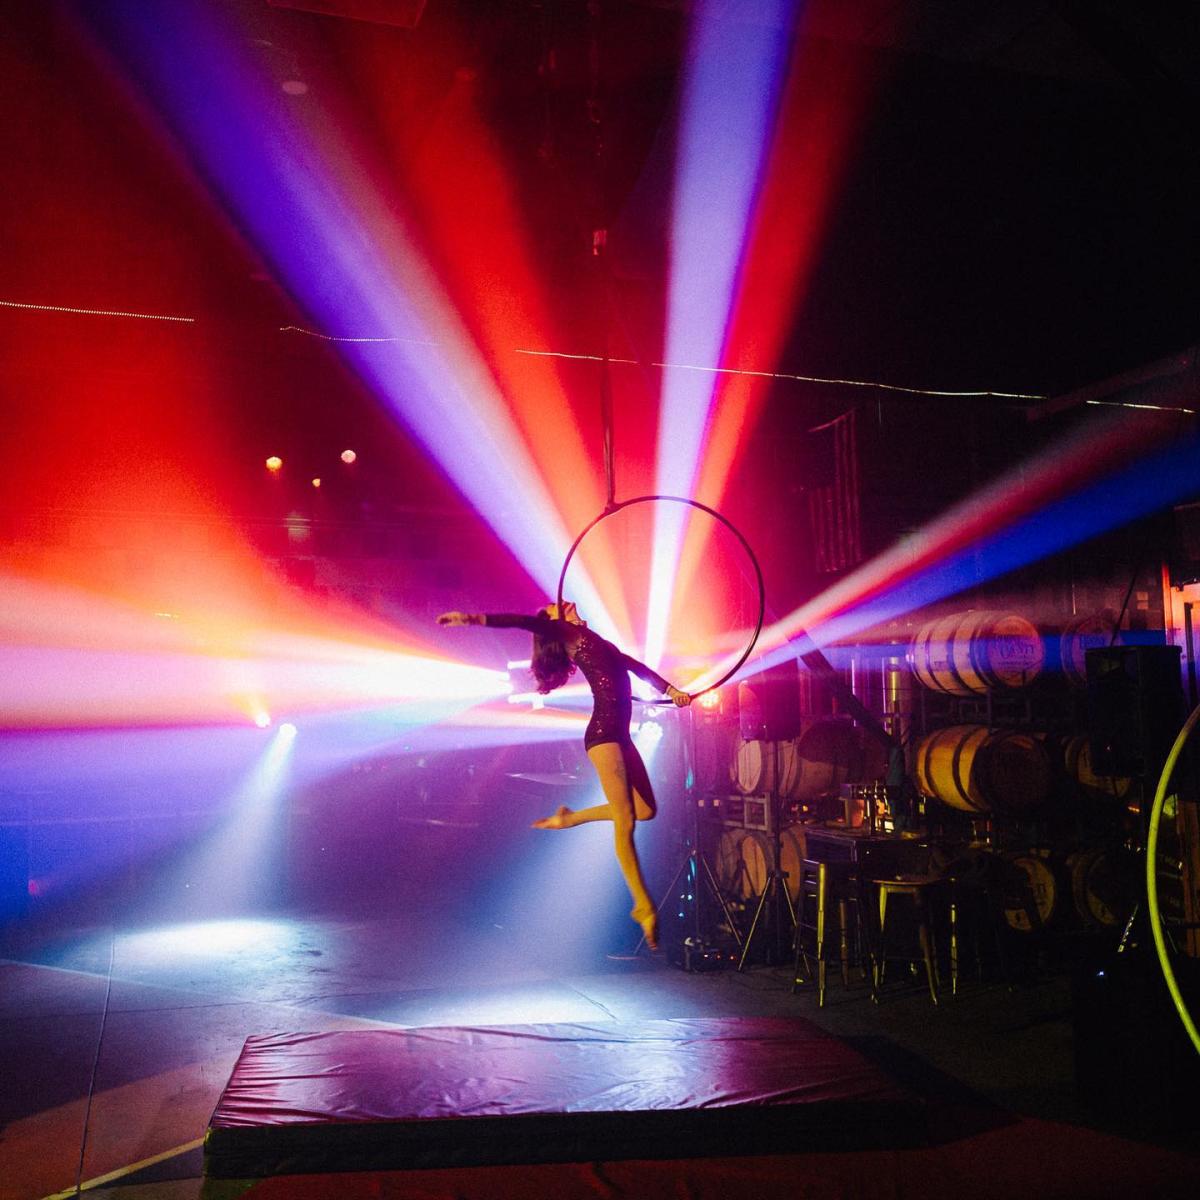 Image is of a lady doing an acrobatic routine while hanging above the ground in a hoop.